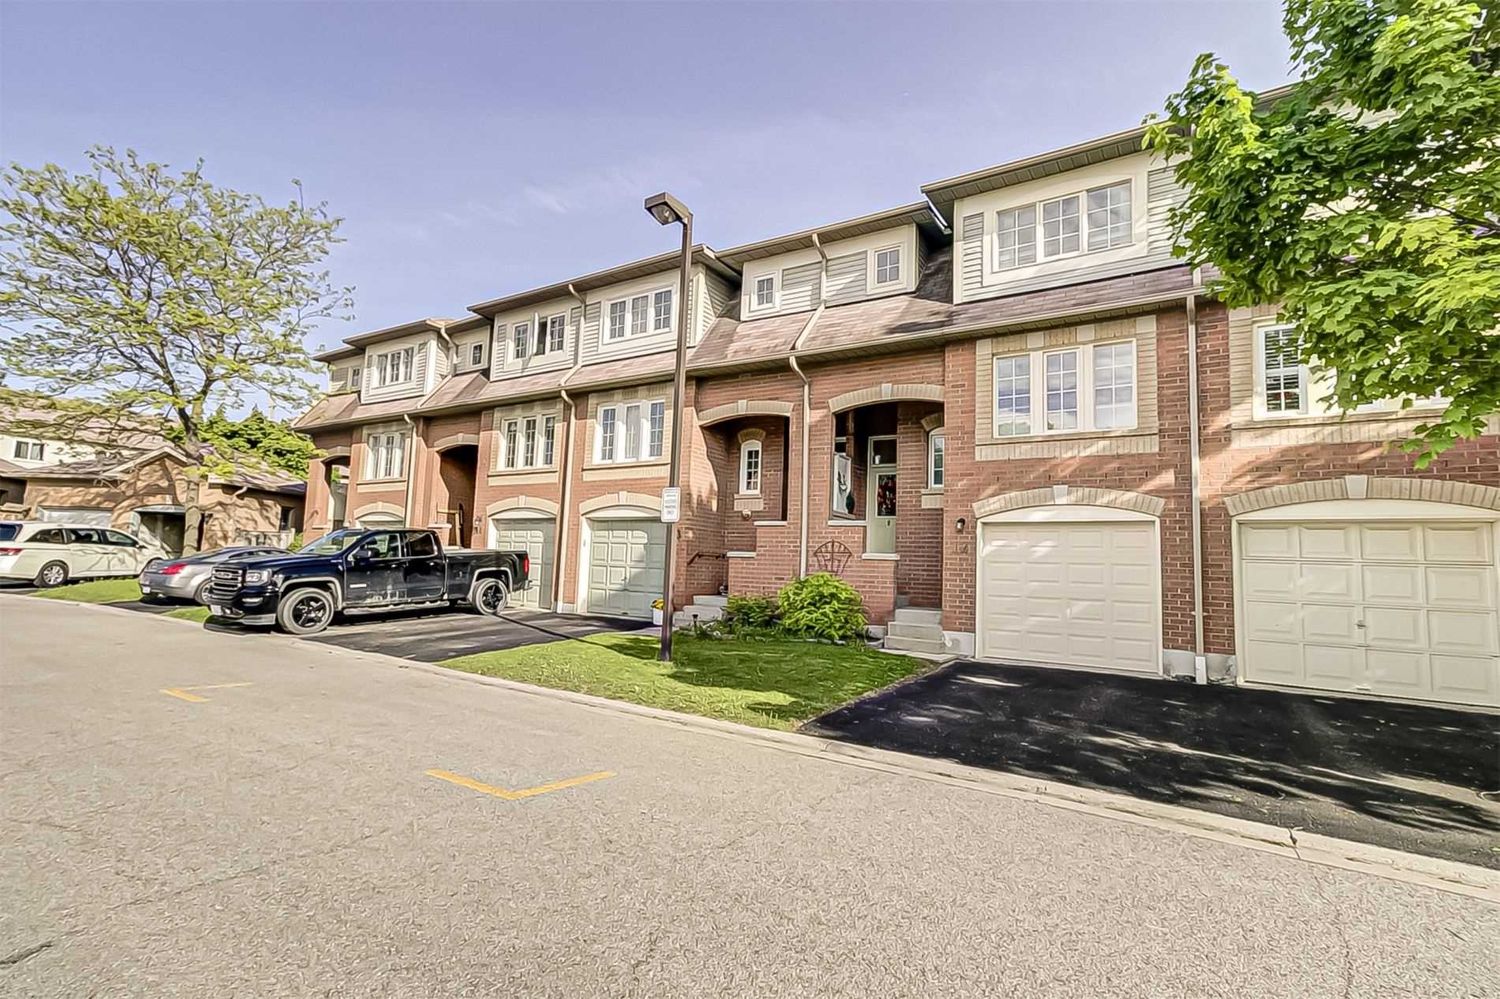 1801 Nichol Avenue. 1801 Nichol Avenue Townhomes is located in  Whitby, Toronto - image #2 of 2